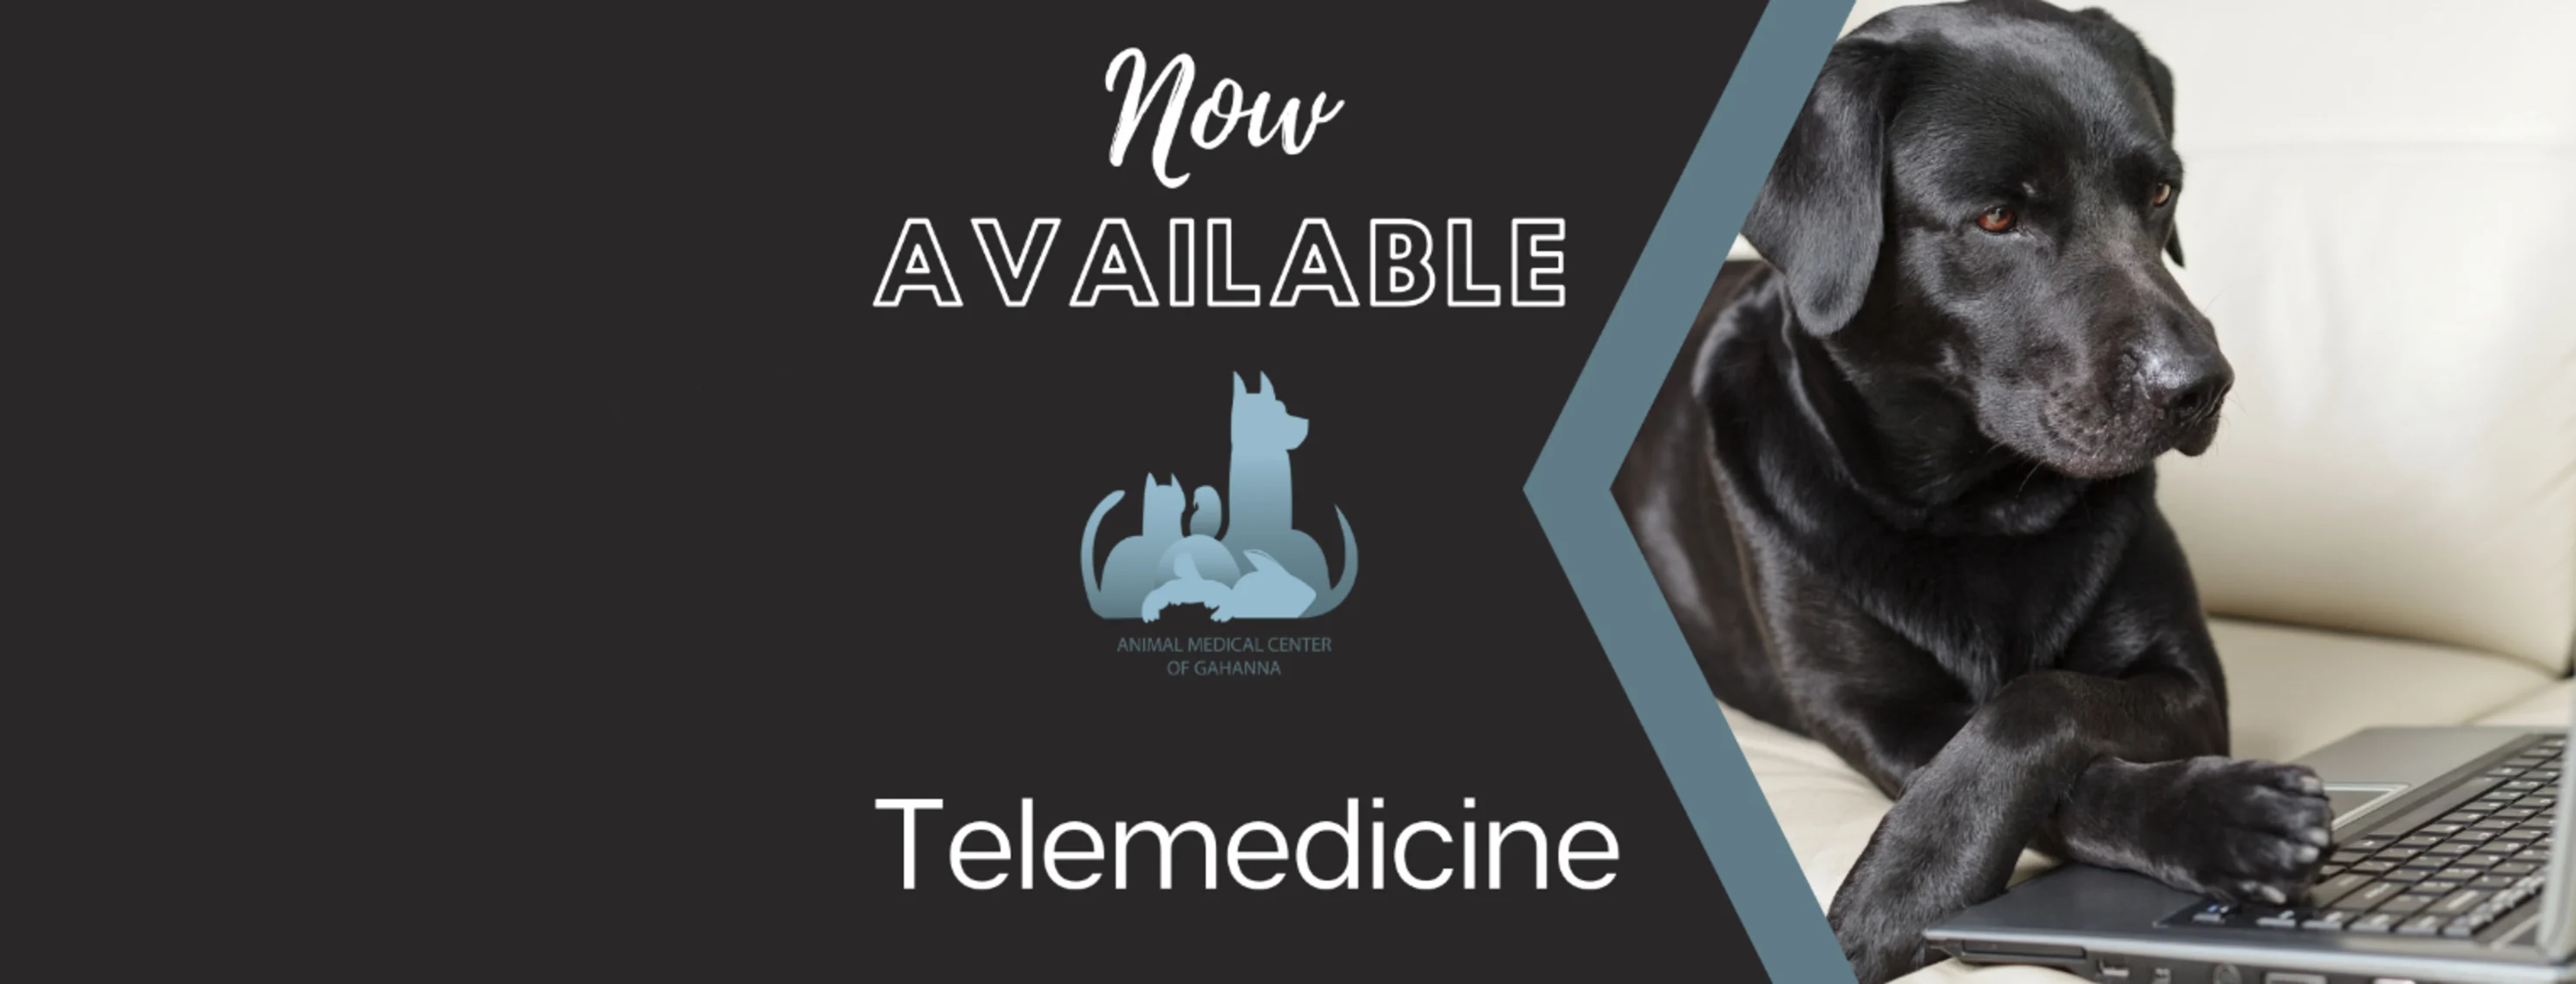 A graphic with the text "Now Available / Telemedicine" featuring a large black dog with their paws on a laptop